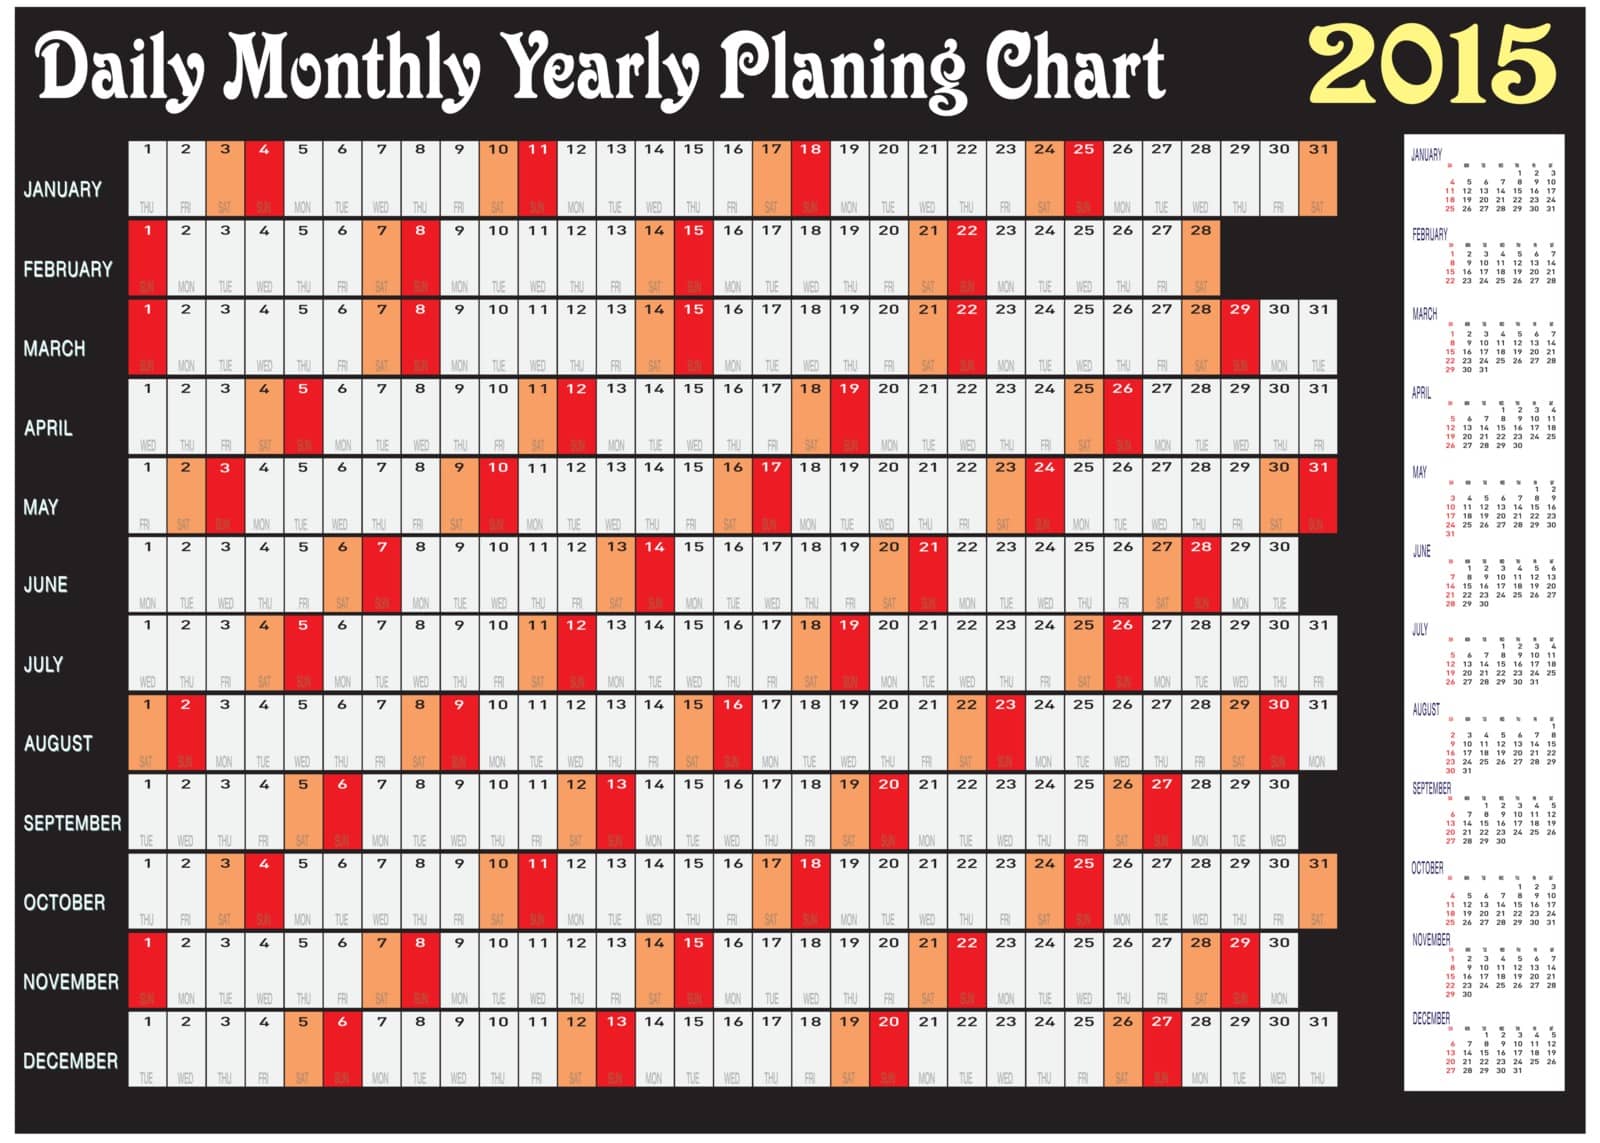 Vector of Planing Chart of Daily Monthly Yearly 2015.